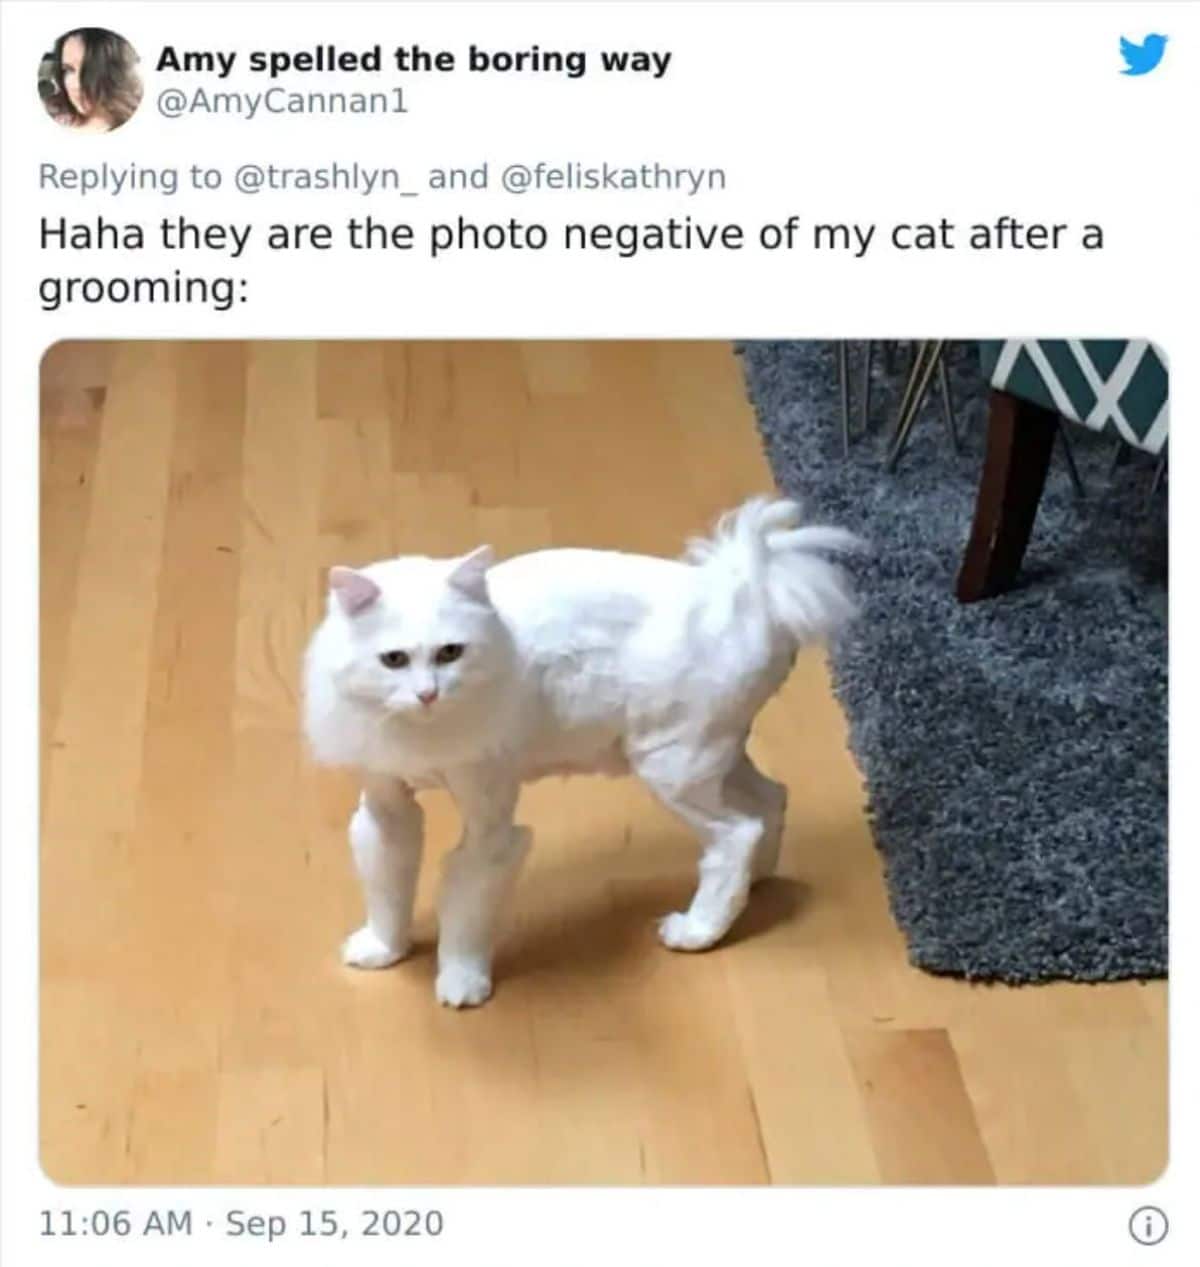 tweet with a photo of a white cat standing on a wooden floor with the top part of the legs shaved